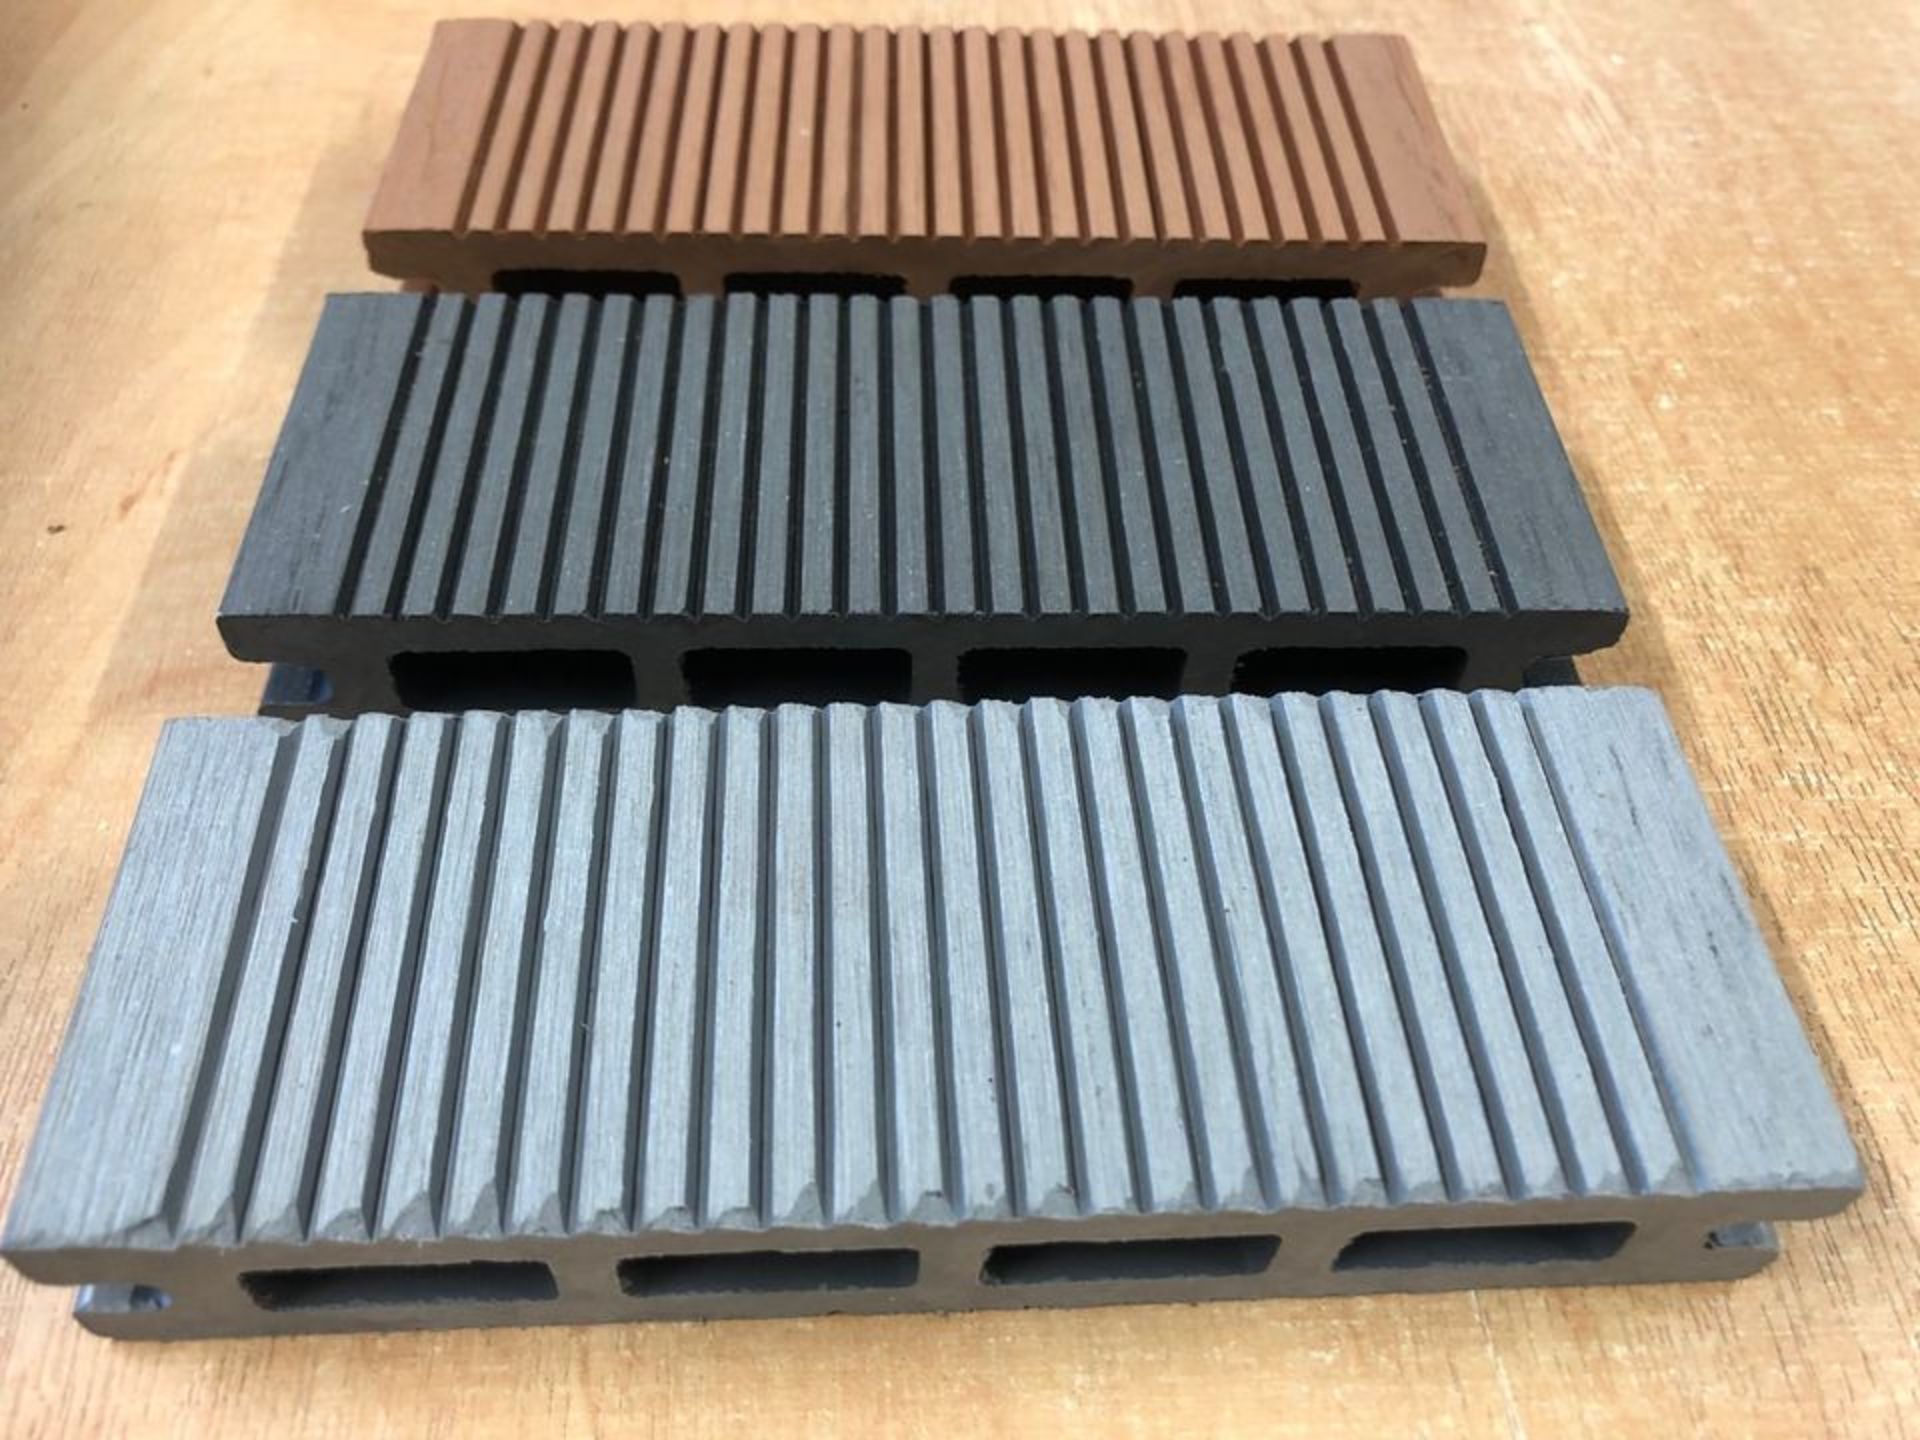 * Complete Dark Grey WPC decking Kit 2.9m x 2.9m includes joists - clips - decking - screws & fixing - Image 3 of 7